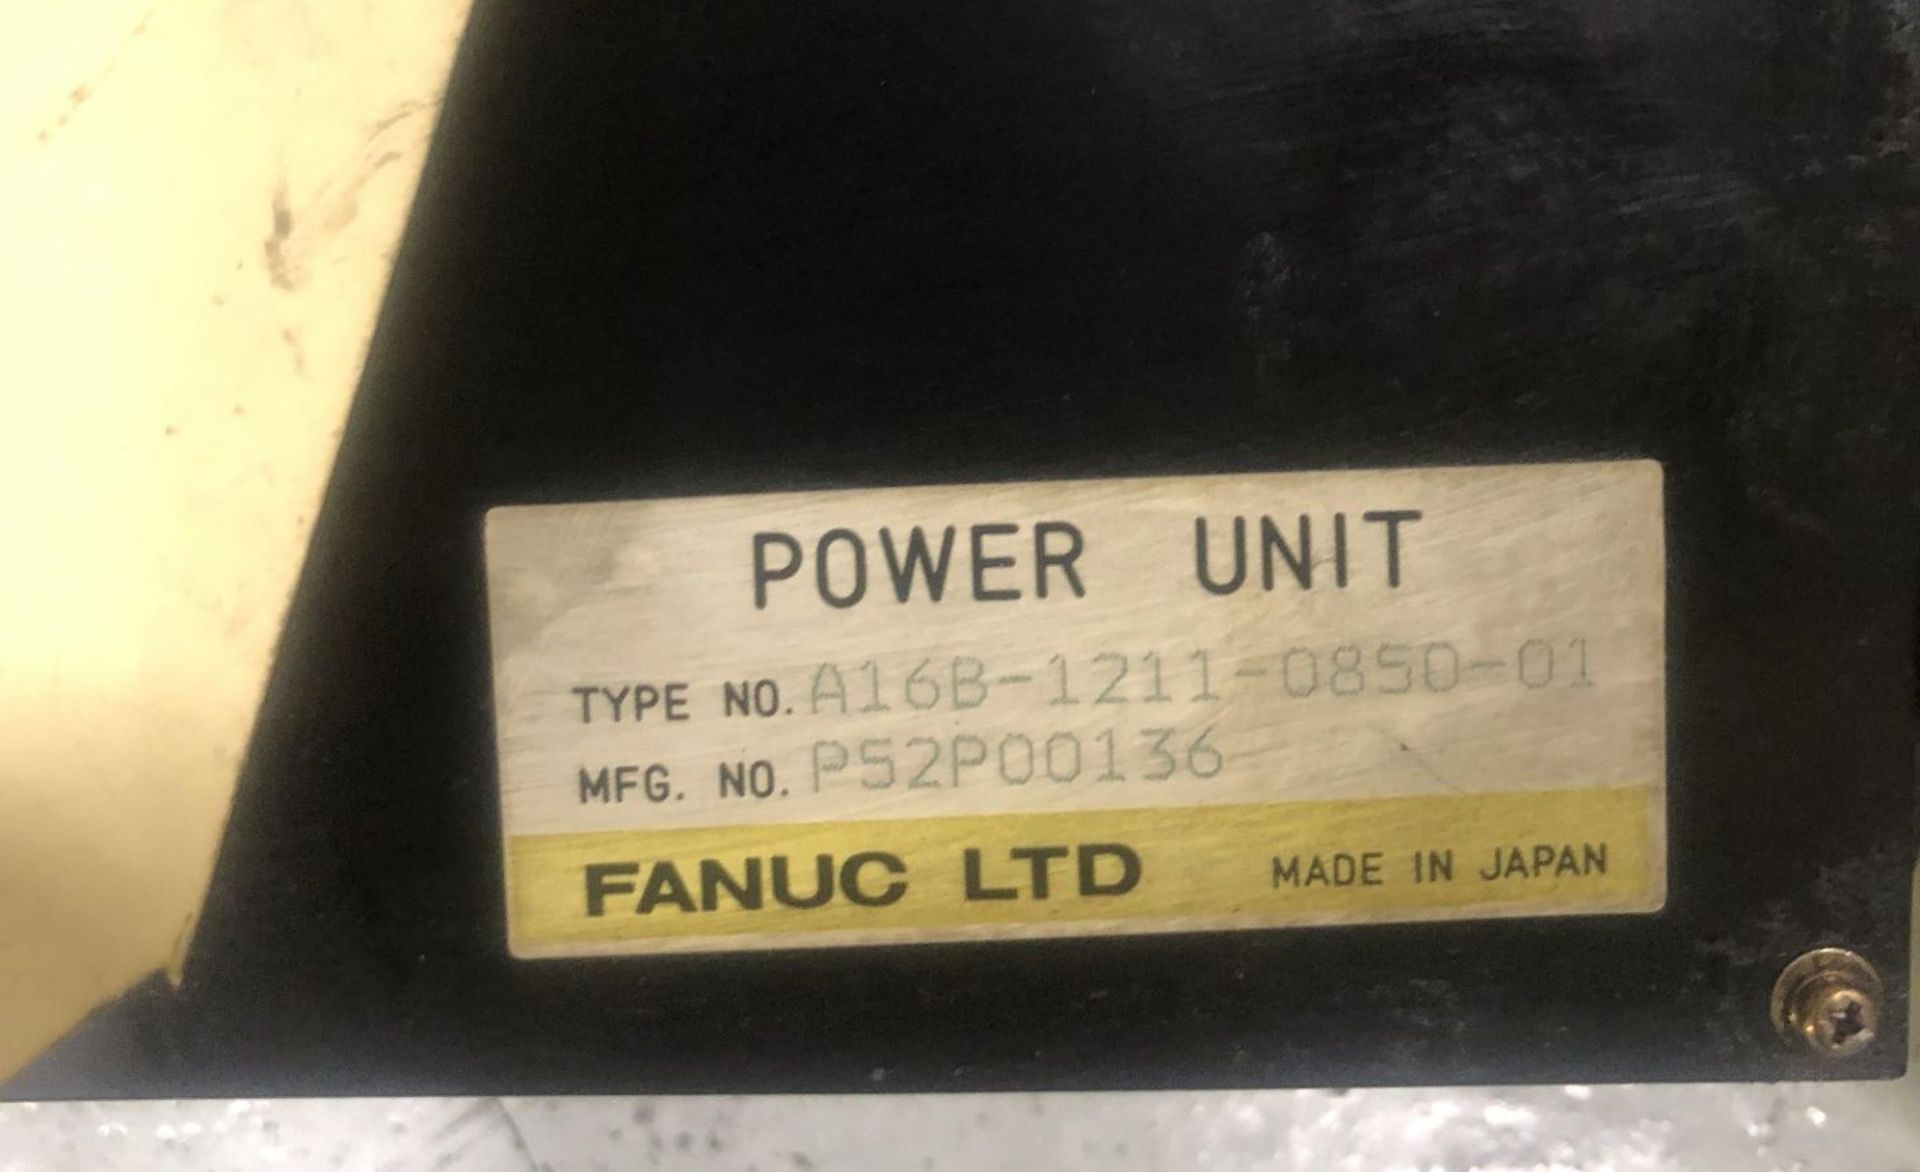 LOT OF 2 Fanuc Power Supplies, A16B-1210-0660 & A16B-1211-0850 - Image 7 of 8